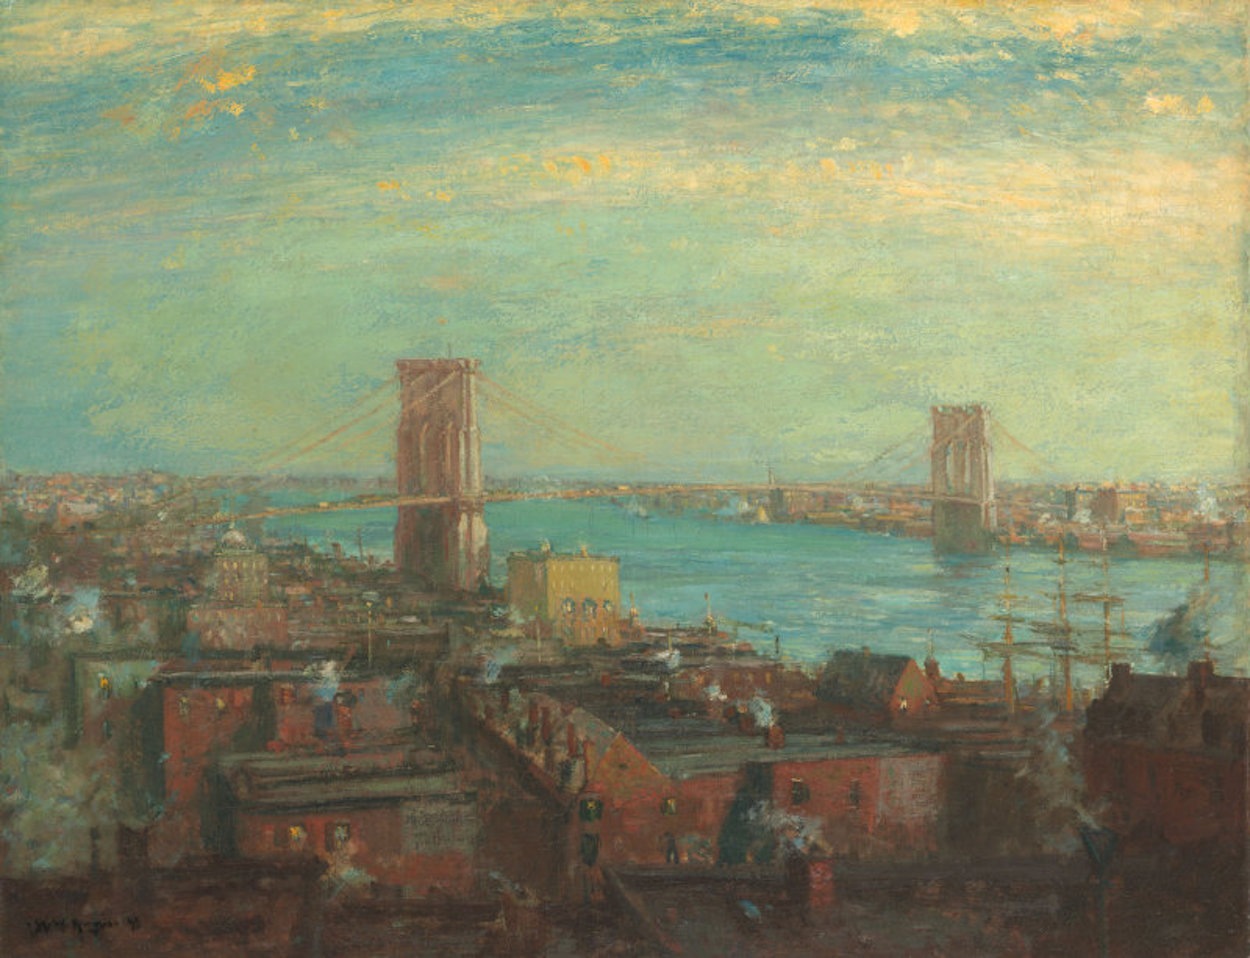 Le pont de Brooklyn by Henry Ward Ranger - 1899 Art Institute of Chicago